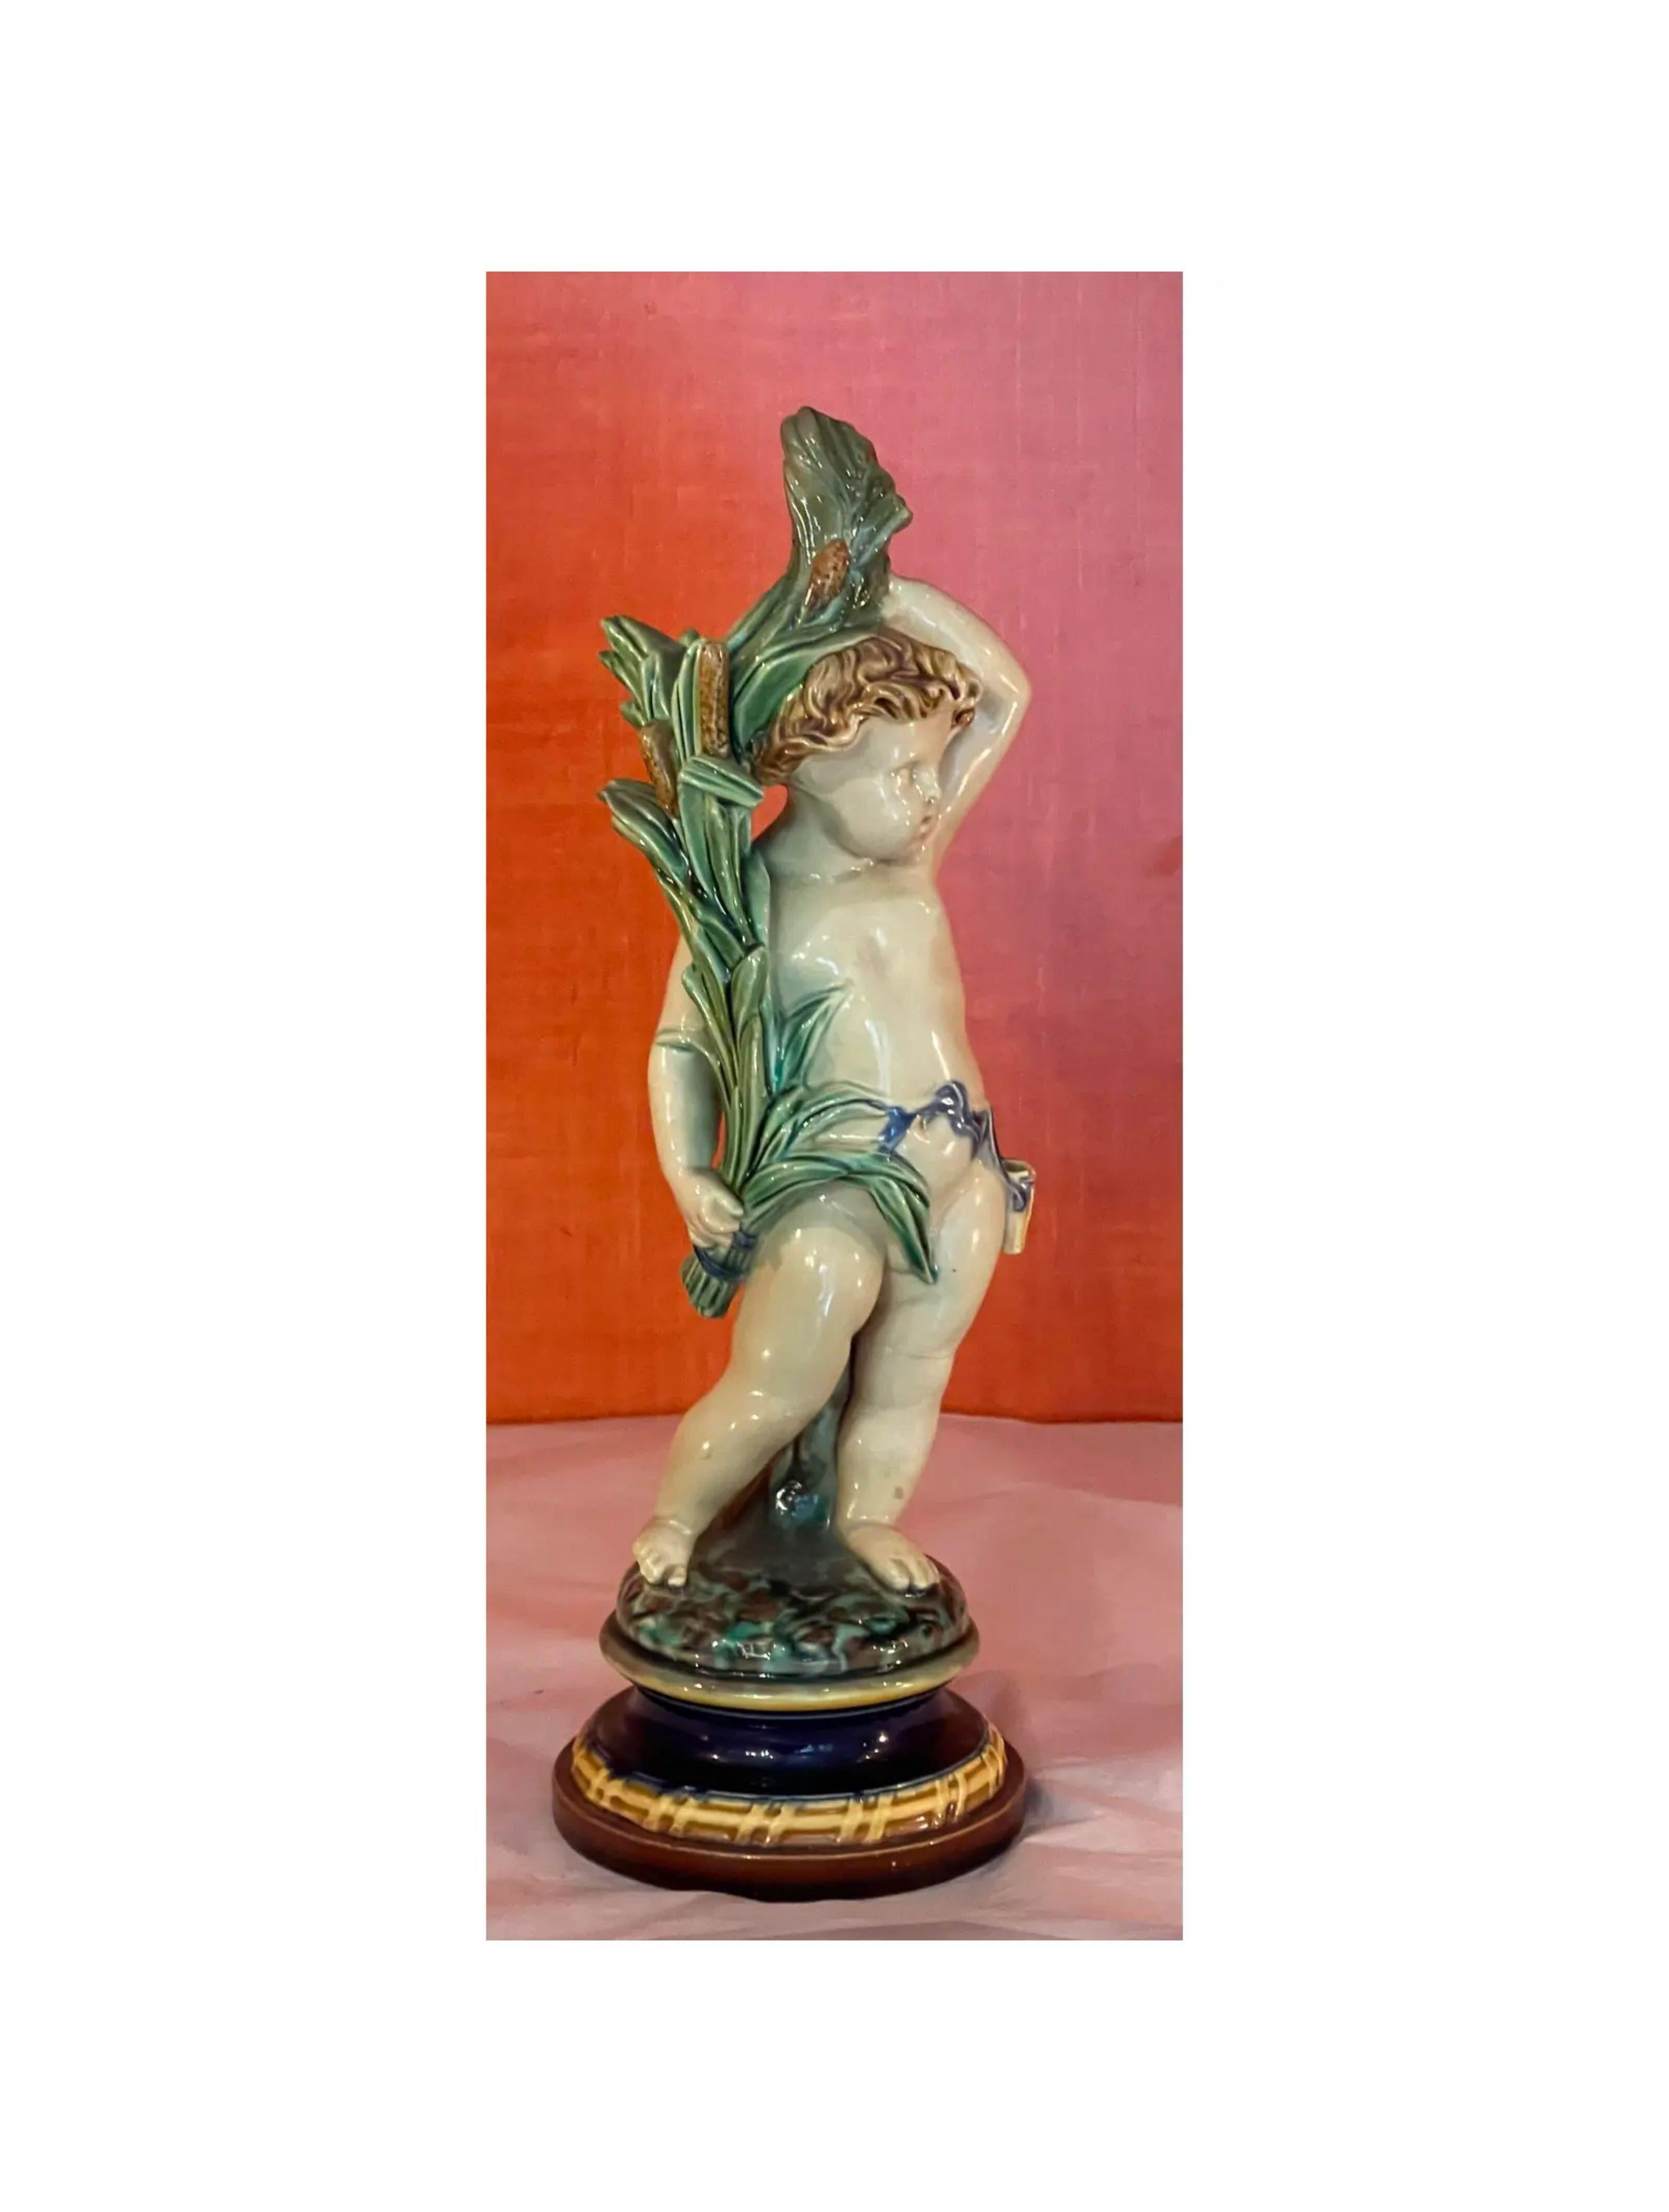 French Provincial Antique Continental Majolica Pottery Putti Figure, 19th Century